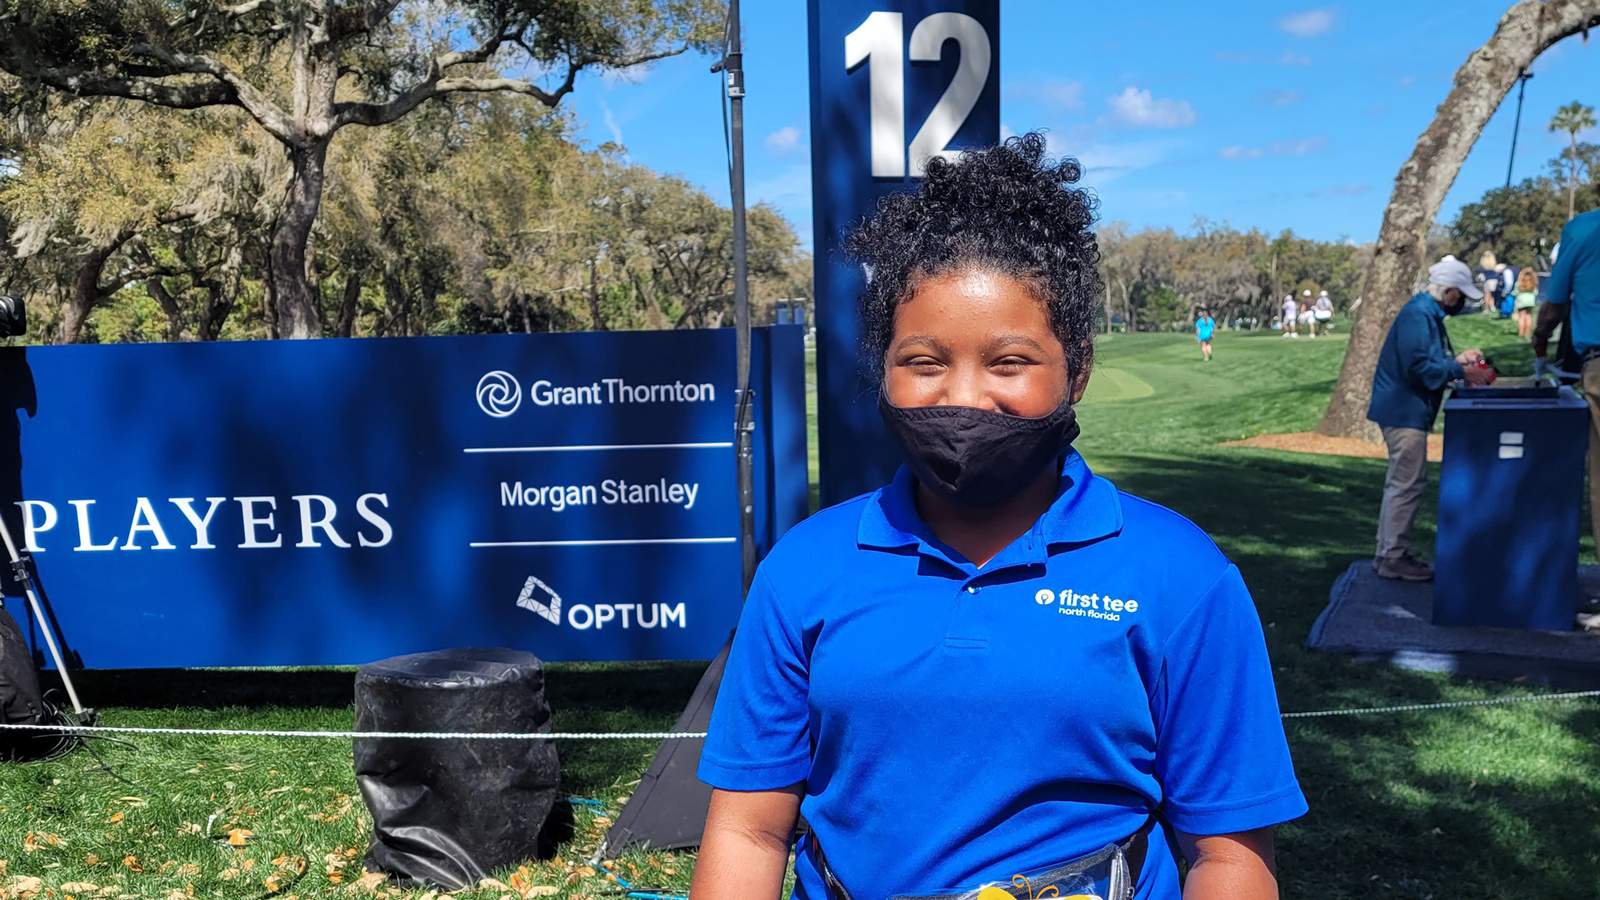 The Players invites dozens of First Tee families a day to enjoy tournament